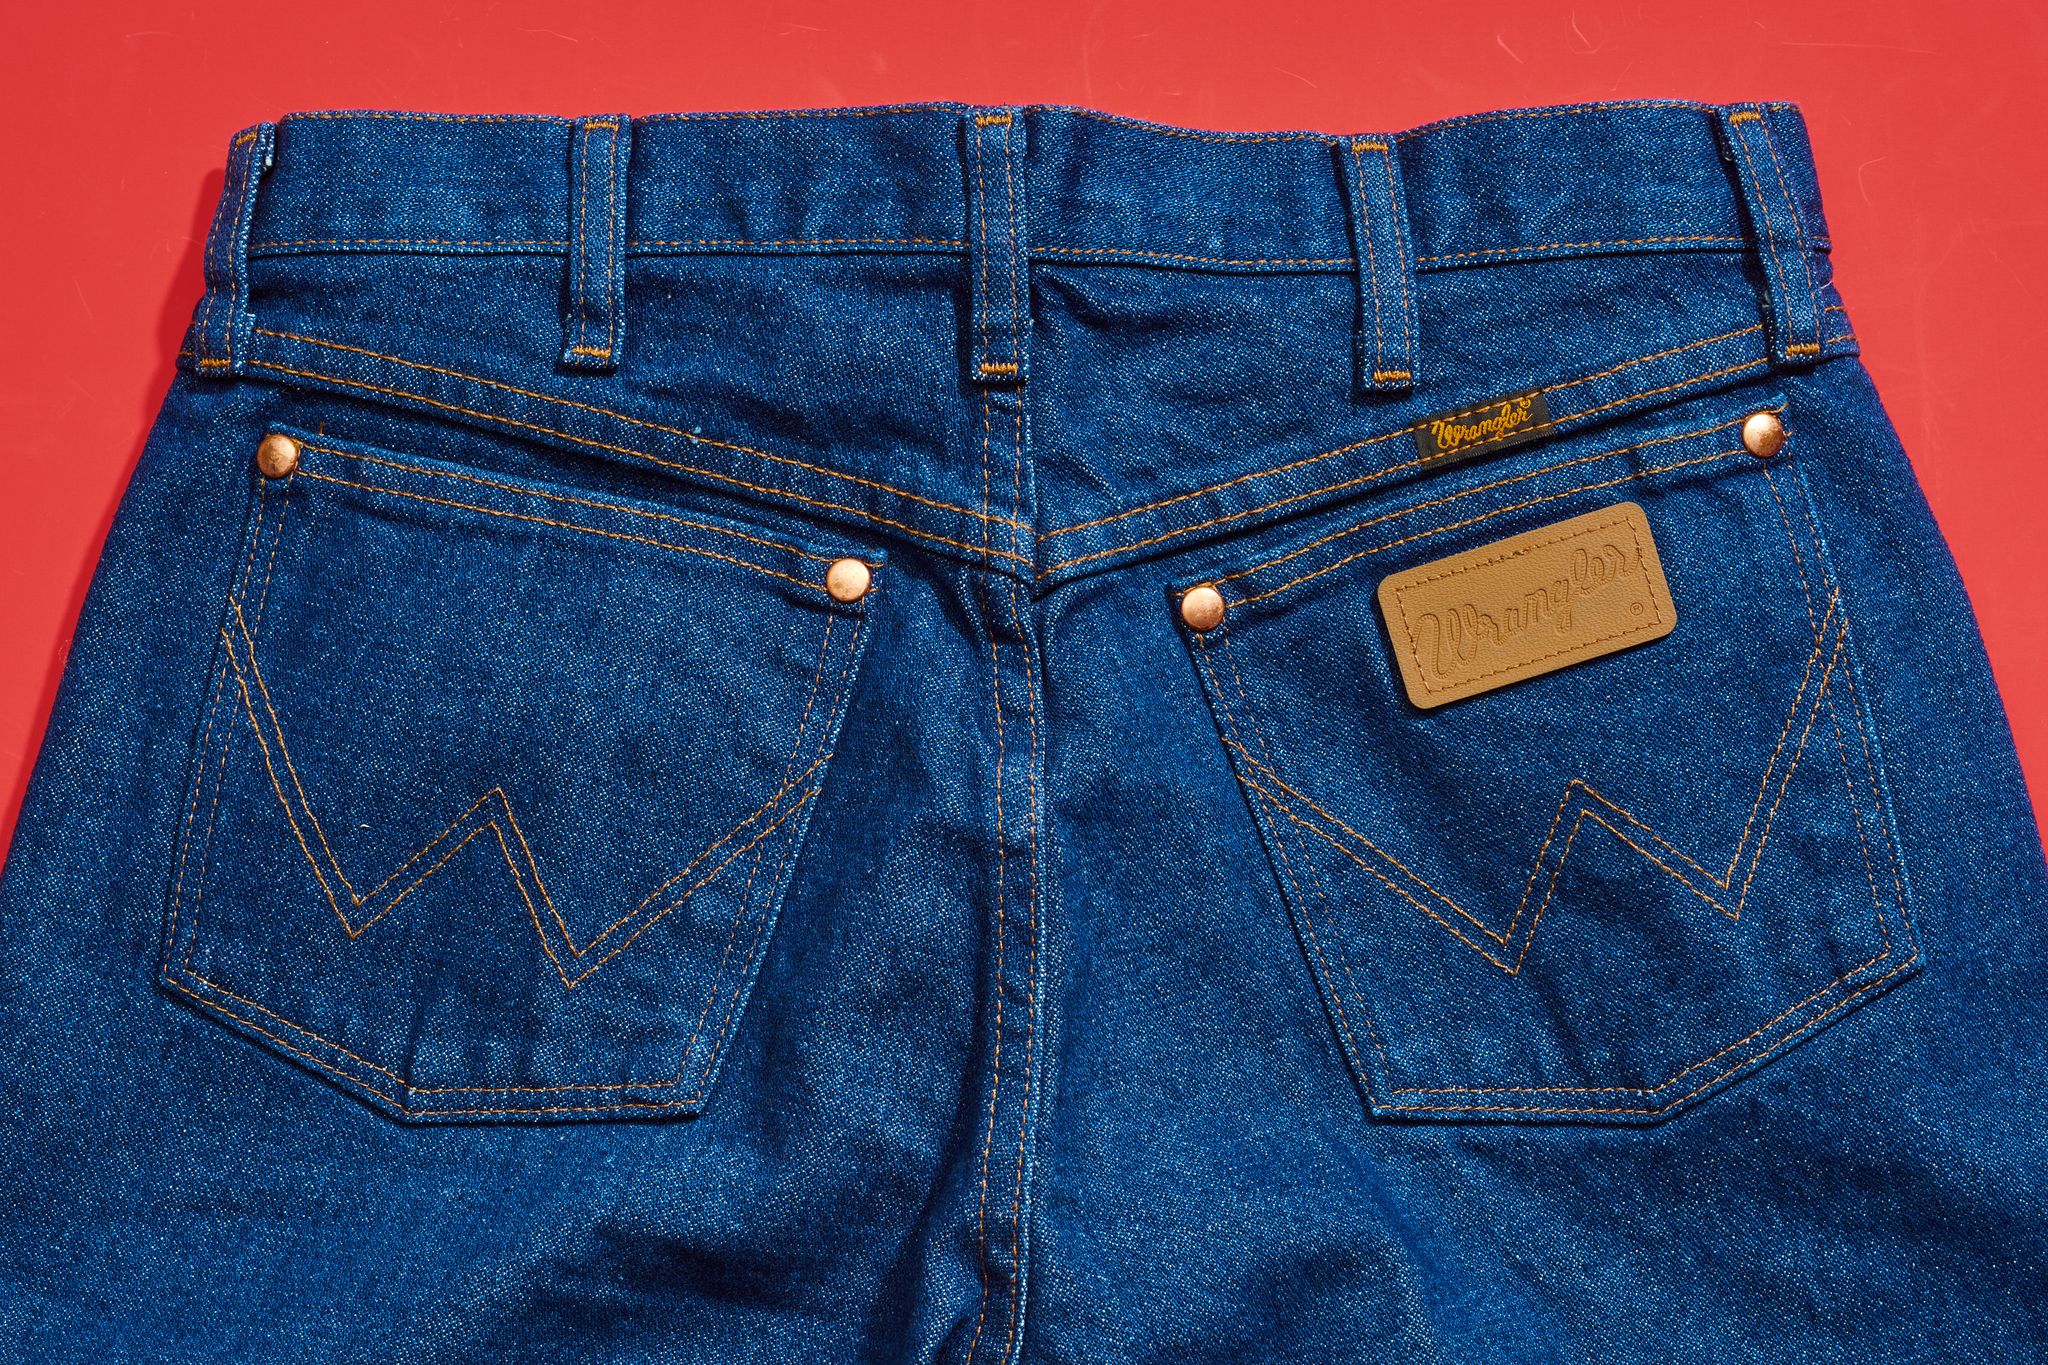 The Cut-Outs On This RM660 Jeans is So Extreme, You'll Never Feel Hot  Wearing Them! - WORLD OF BUZZ